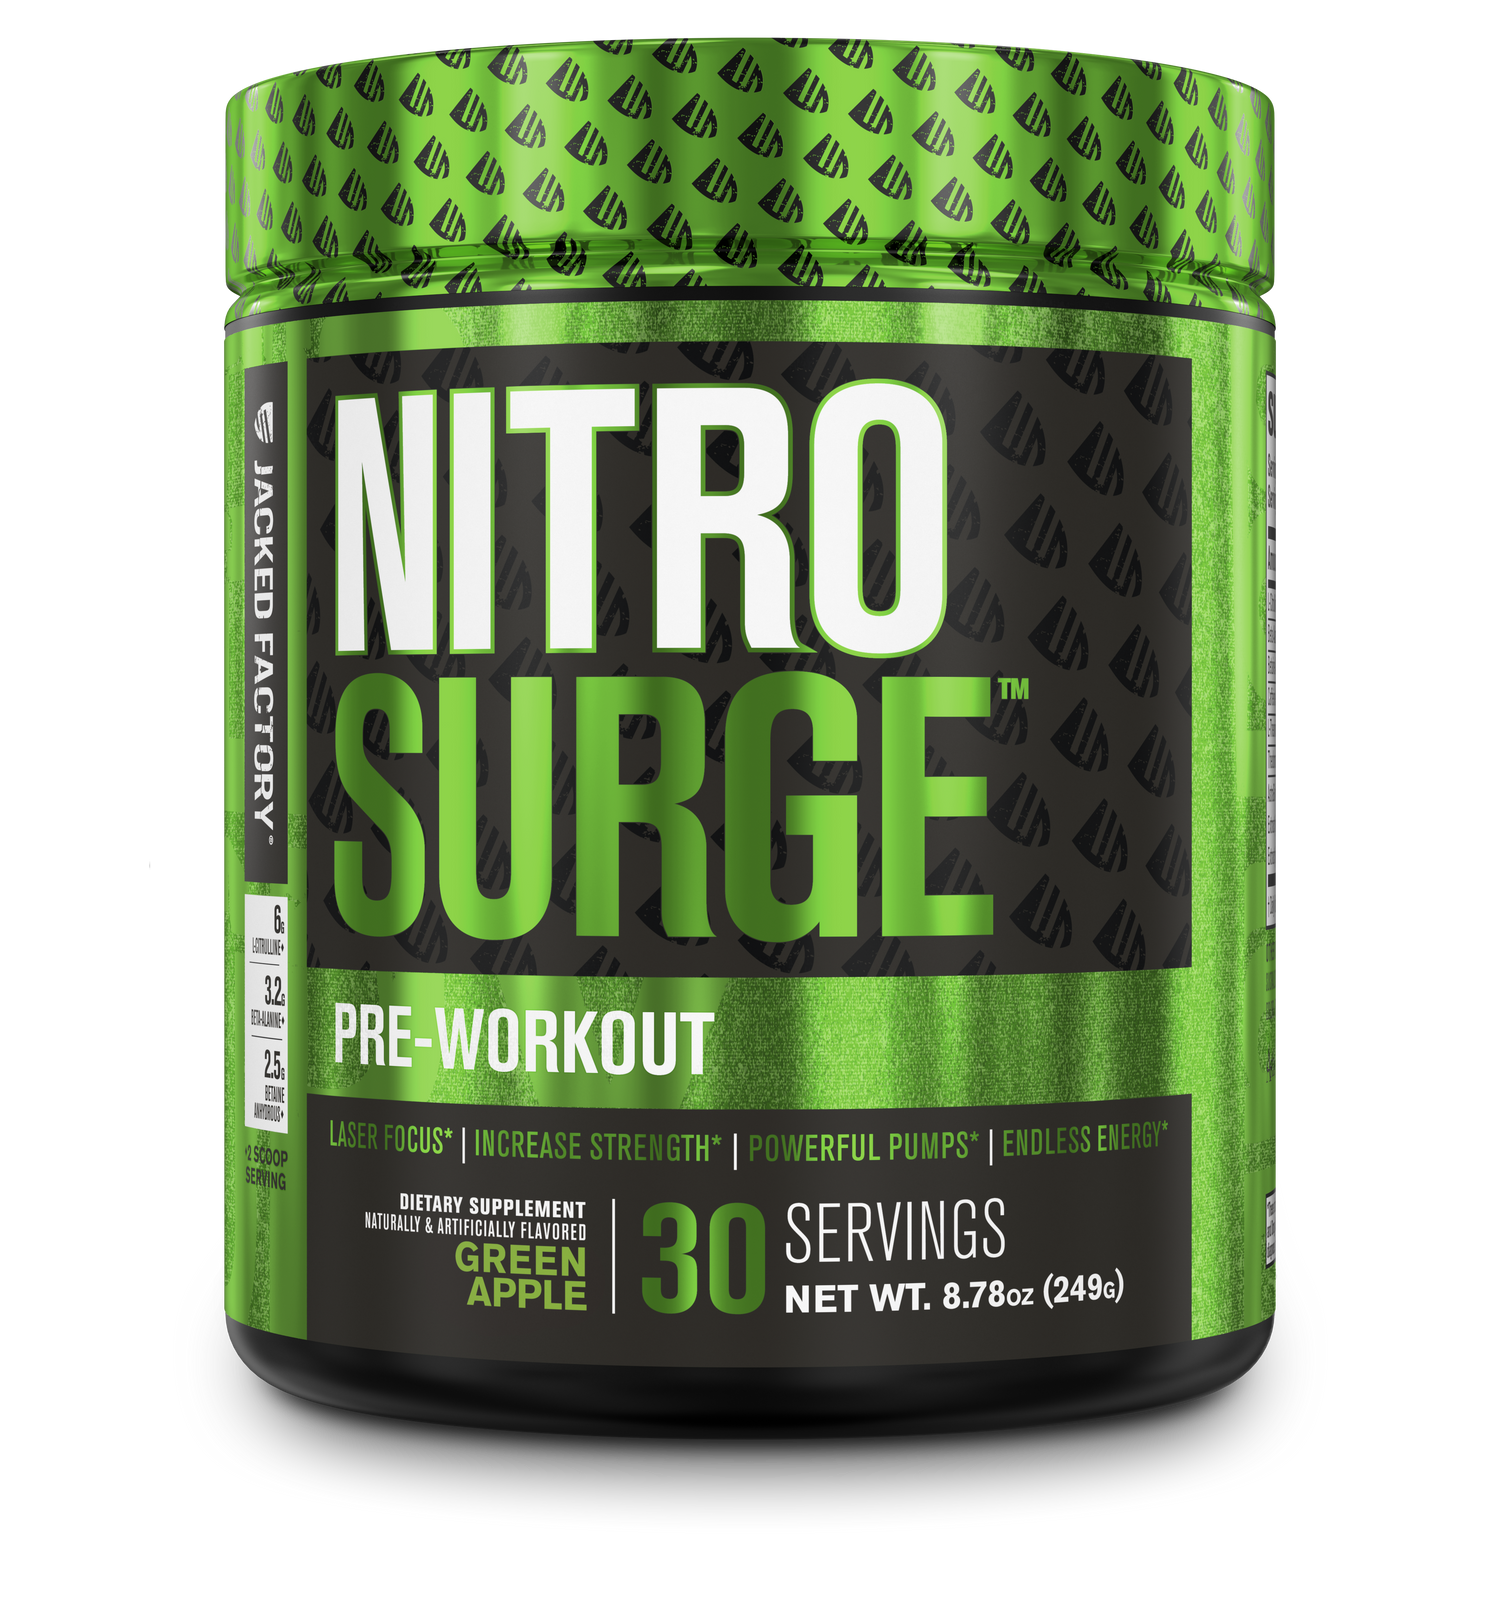 Jacked Factory's green apple Nitrosurge (30 servings) in a black bottle with green label